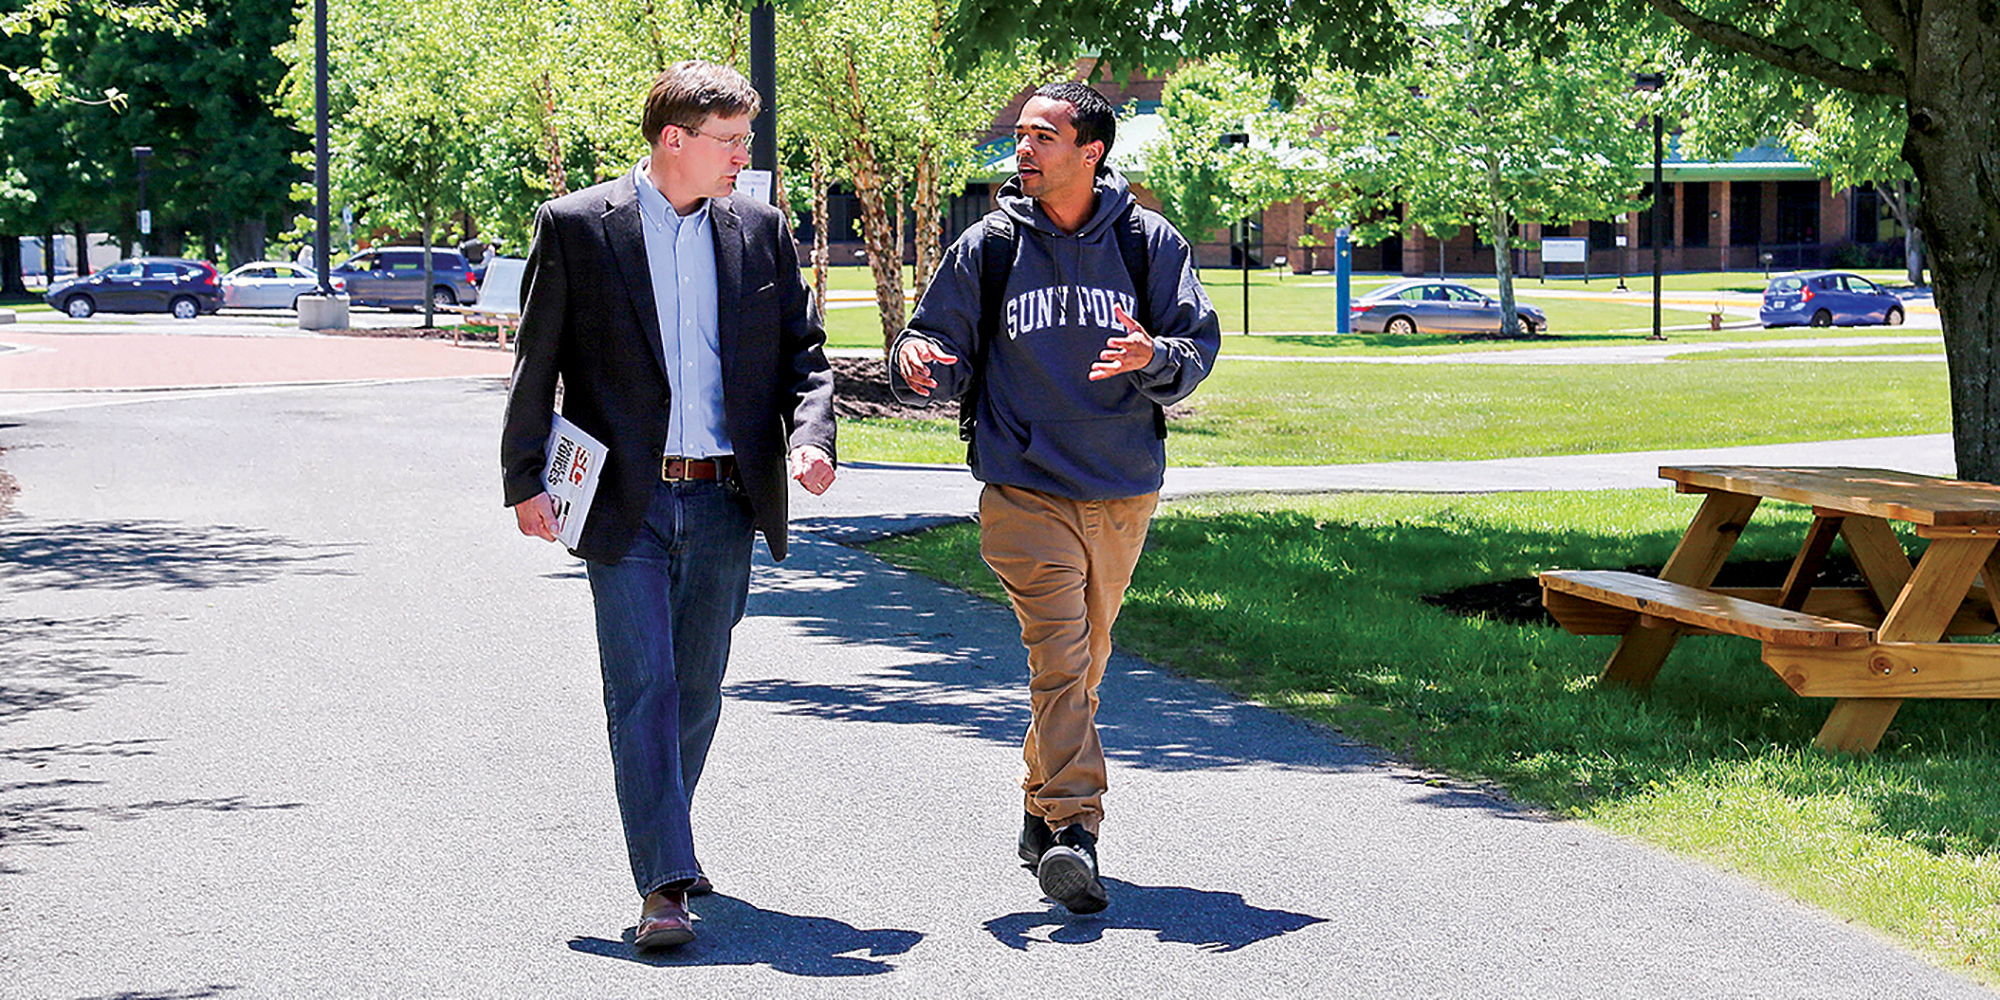 Faculty member John Marsh walks with student in front of Student Center